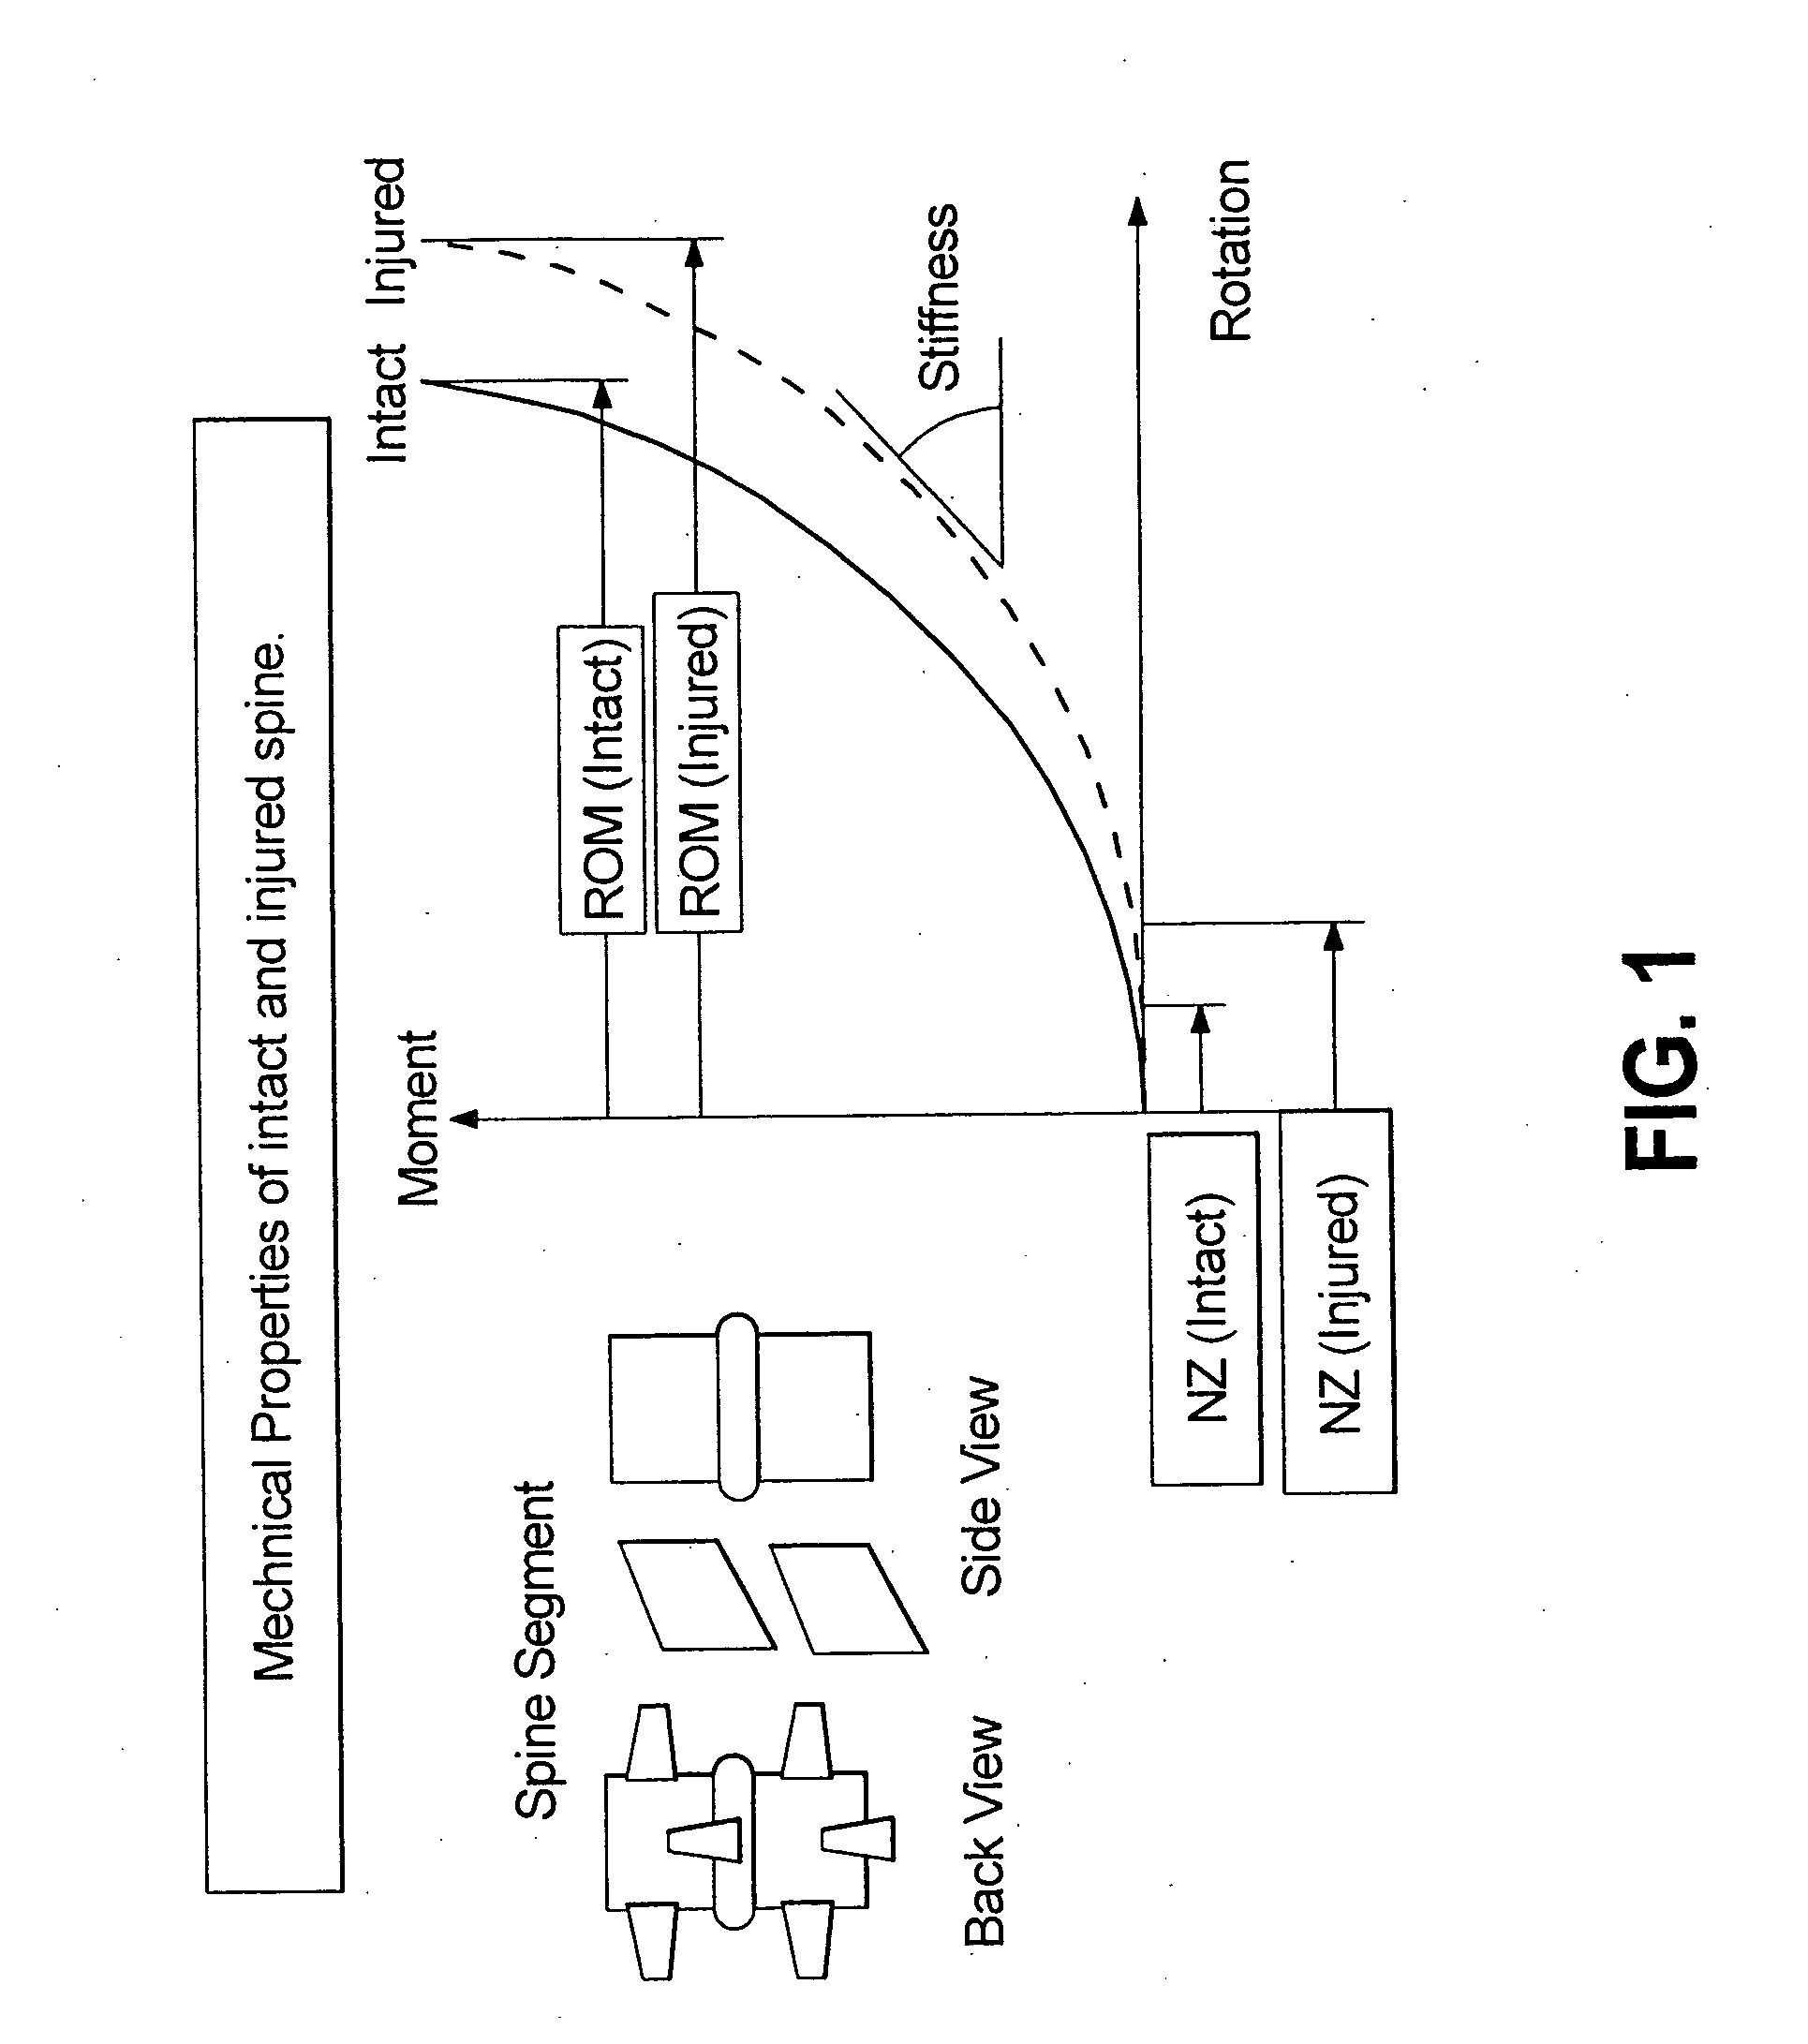 Dynamic spine stabilization device with travel-limiting functionality